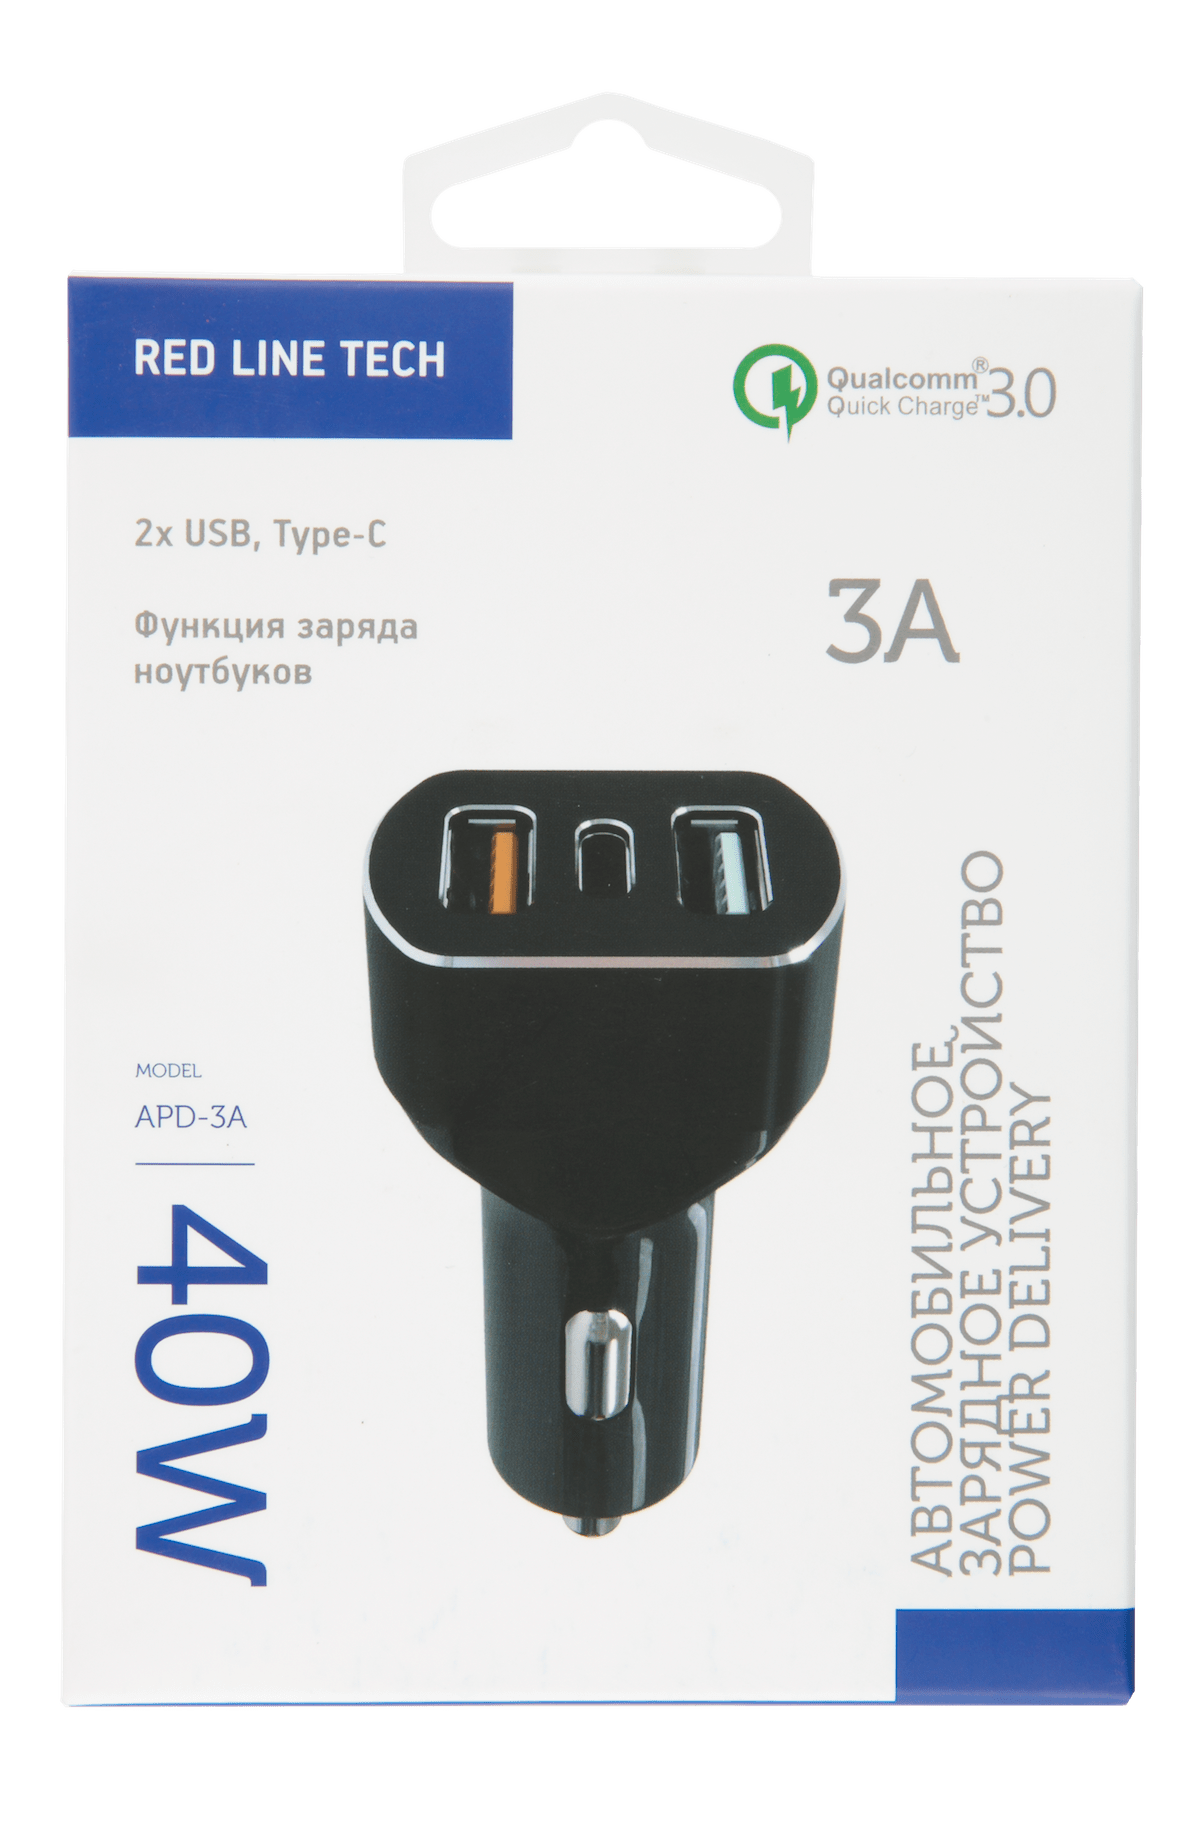 АЗУ Red Line Tech 2 USB + Type-C (модель APD-3A), 3A, Power Delivery